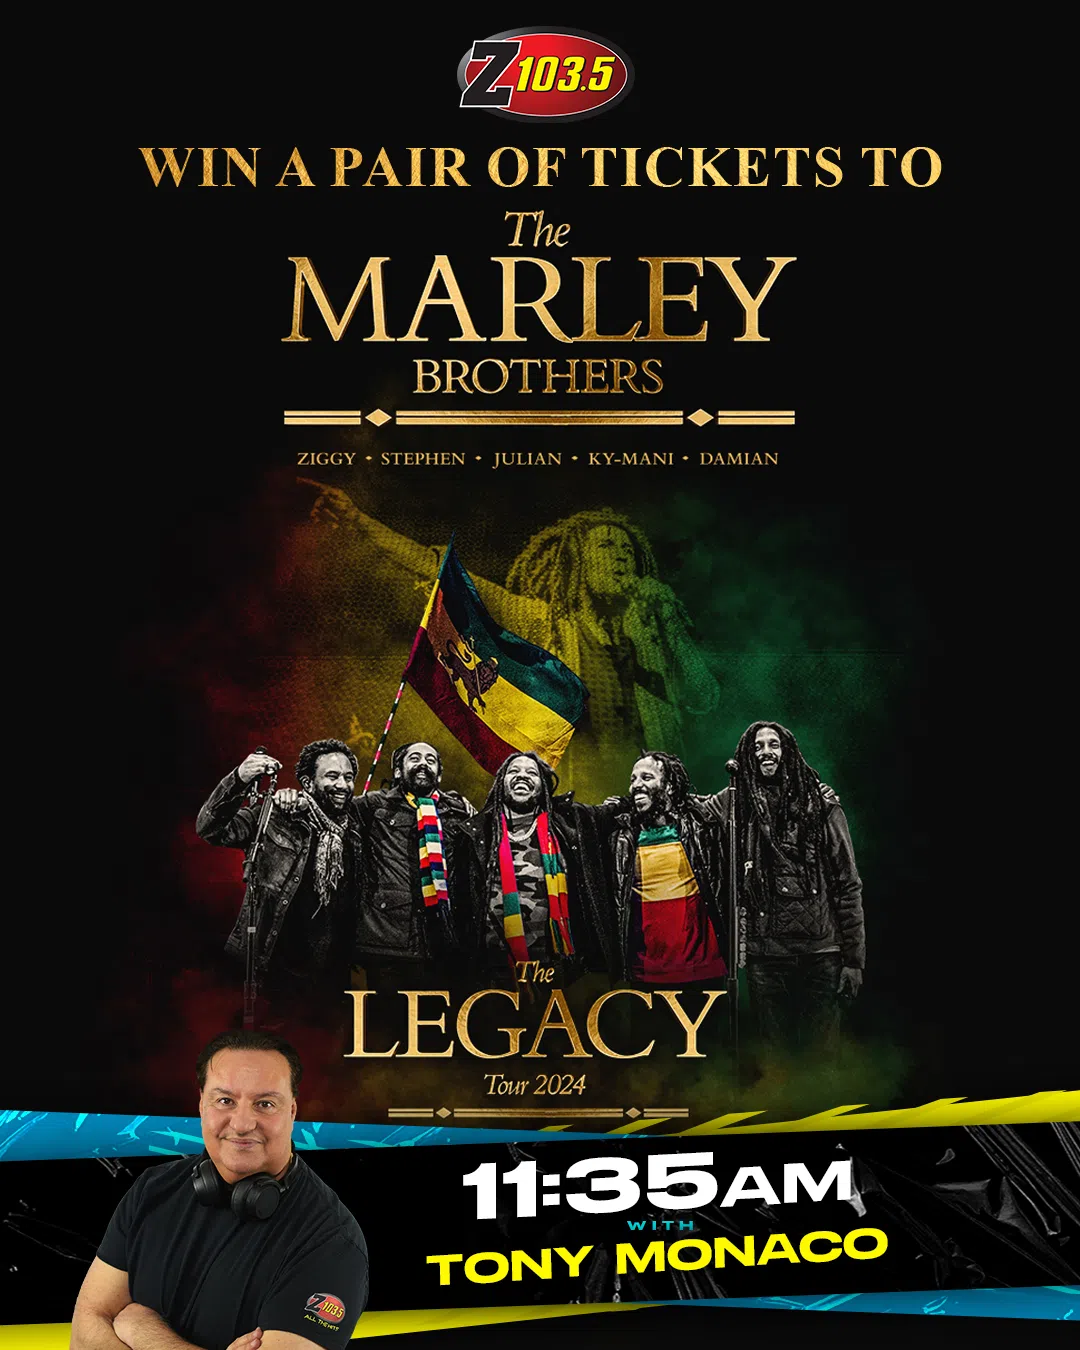 Feature: https://z1035.com/win/win-a-pair-of-tickets-to-see-the-marley-brothers-the-legacy-tour/